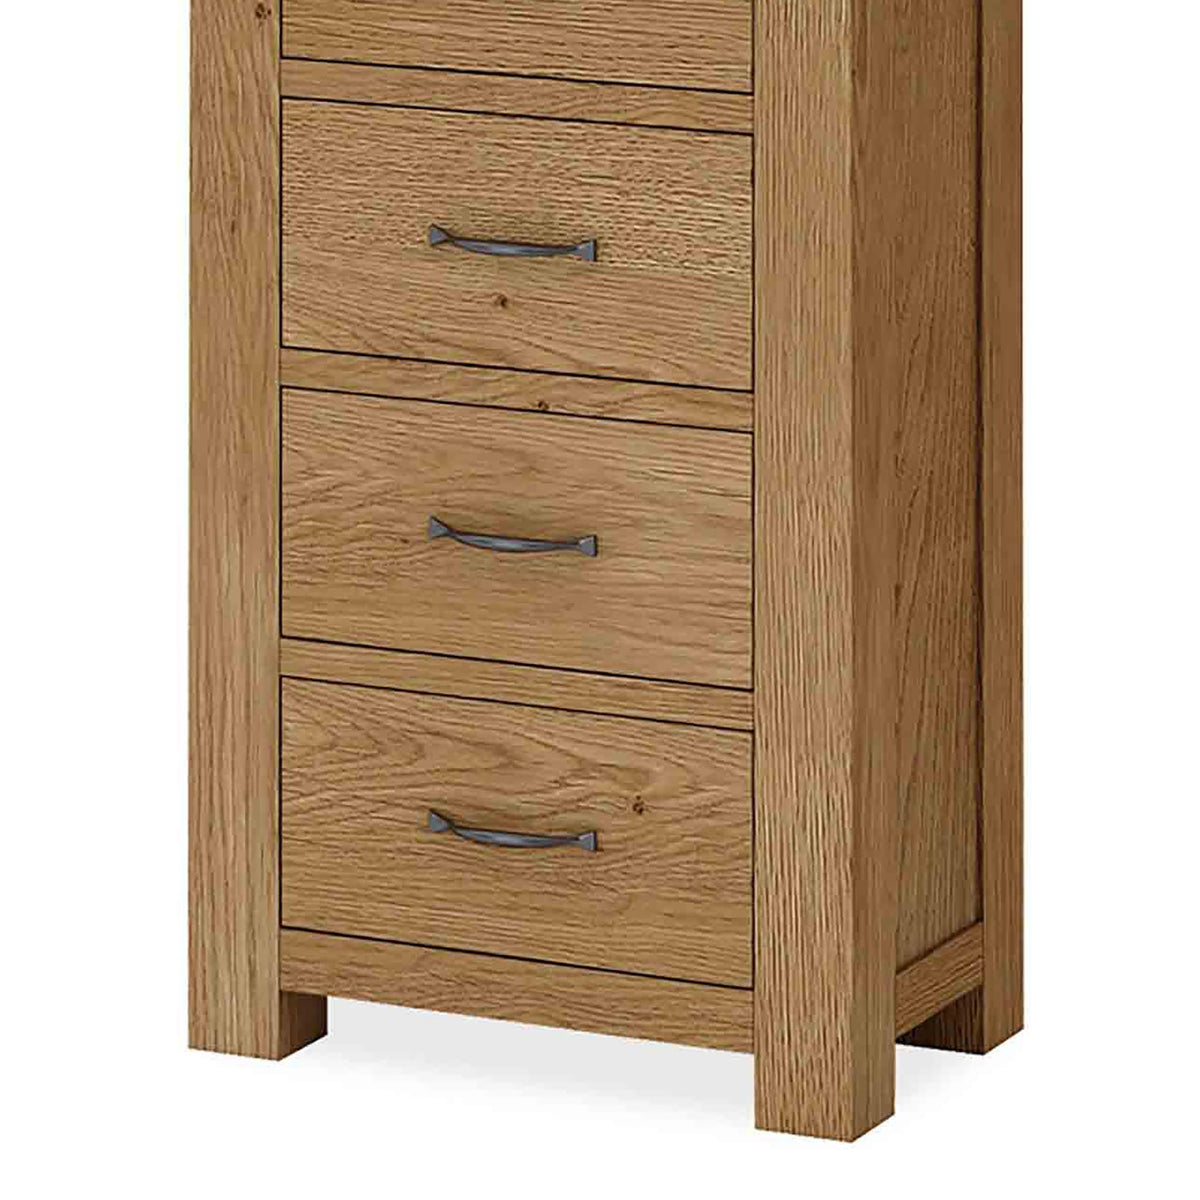 The Abbey Grande Oak Tallboy - Close Up View of Base